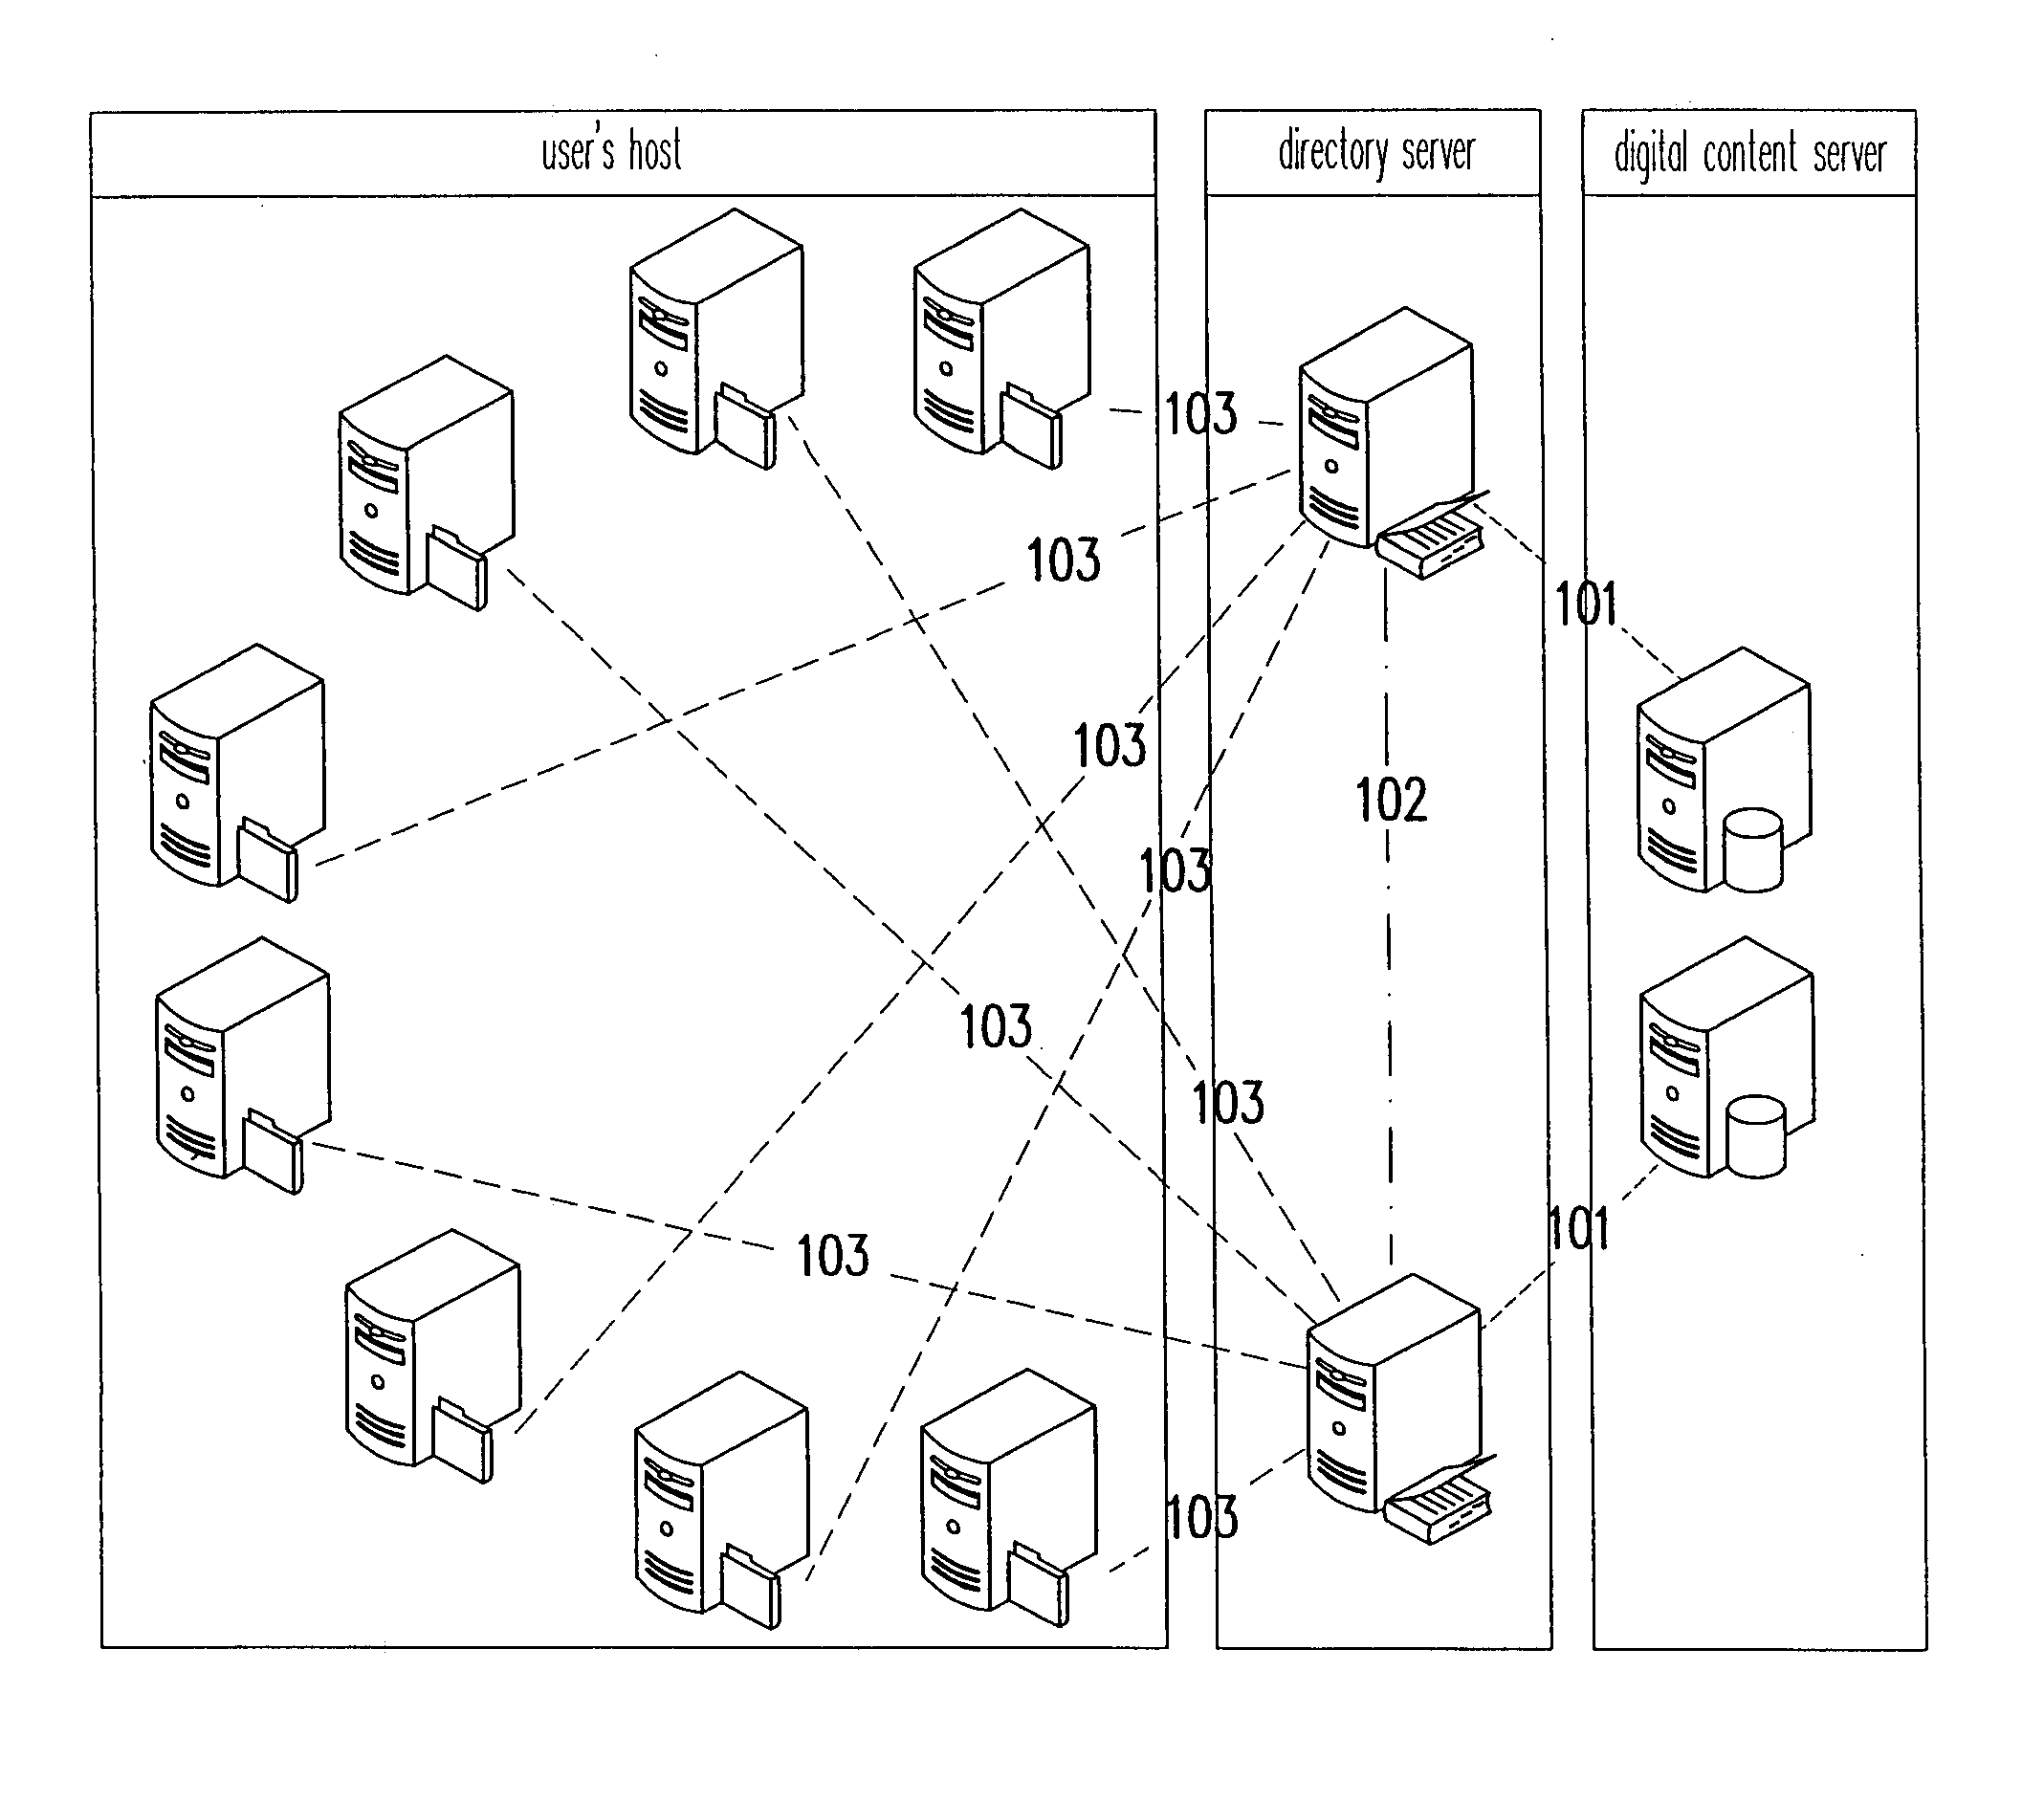 Method and system for managing distributed storage of digital contents